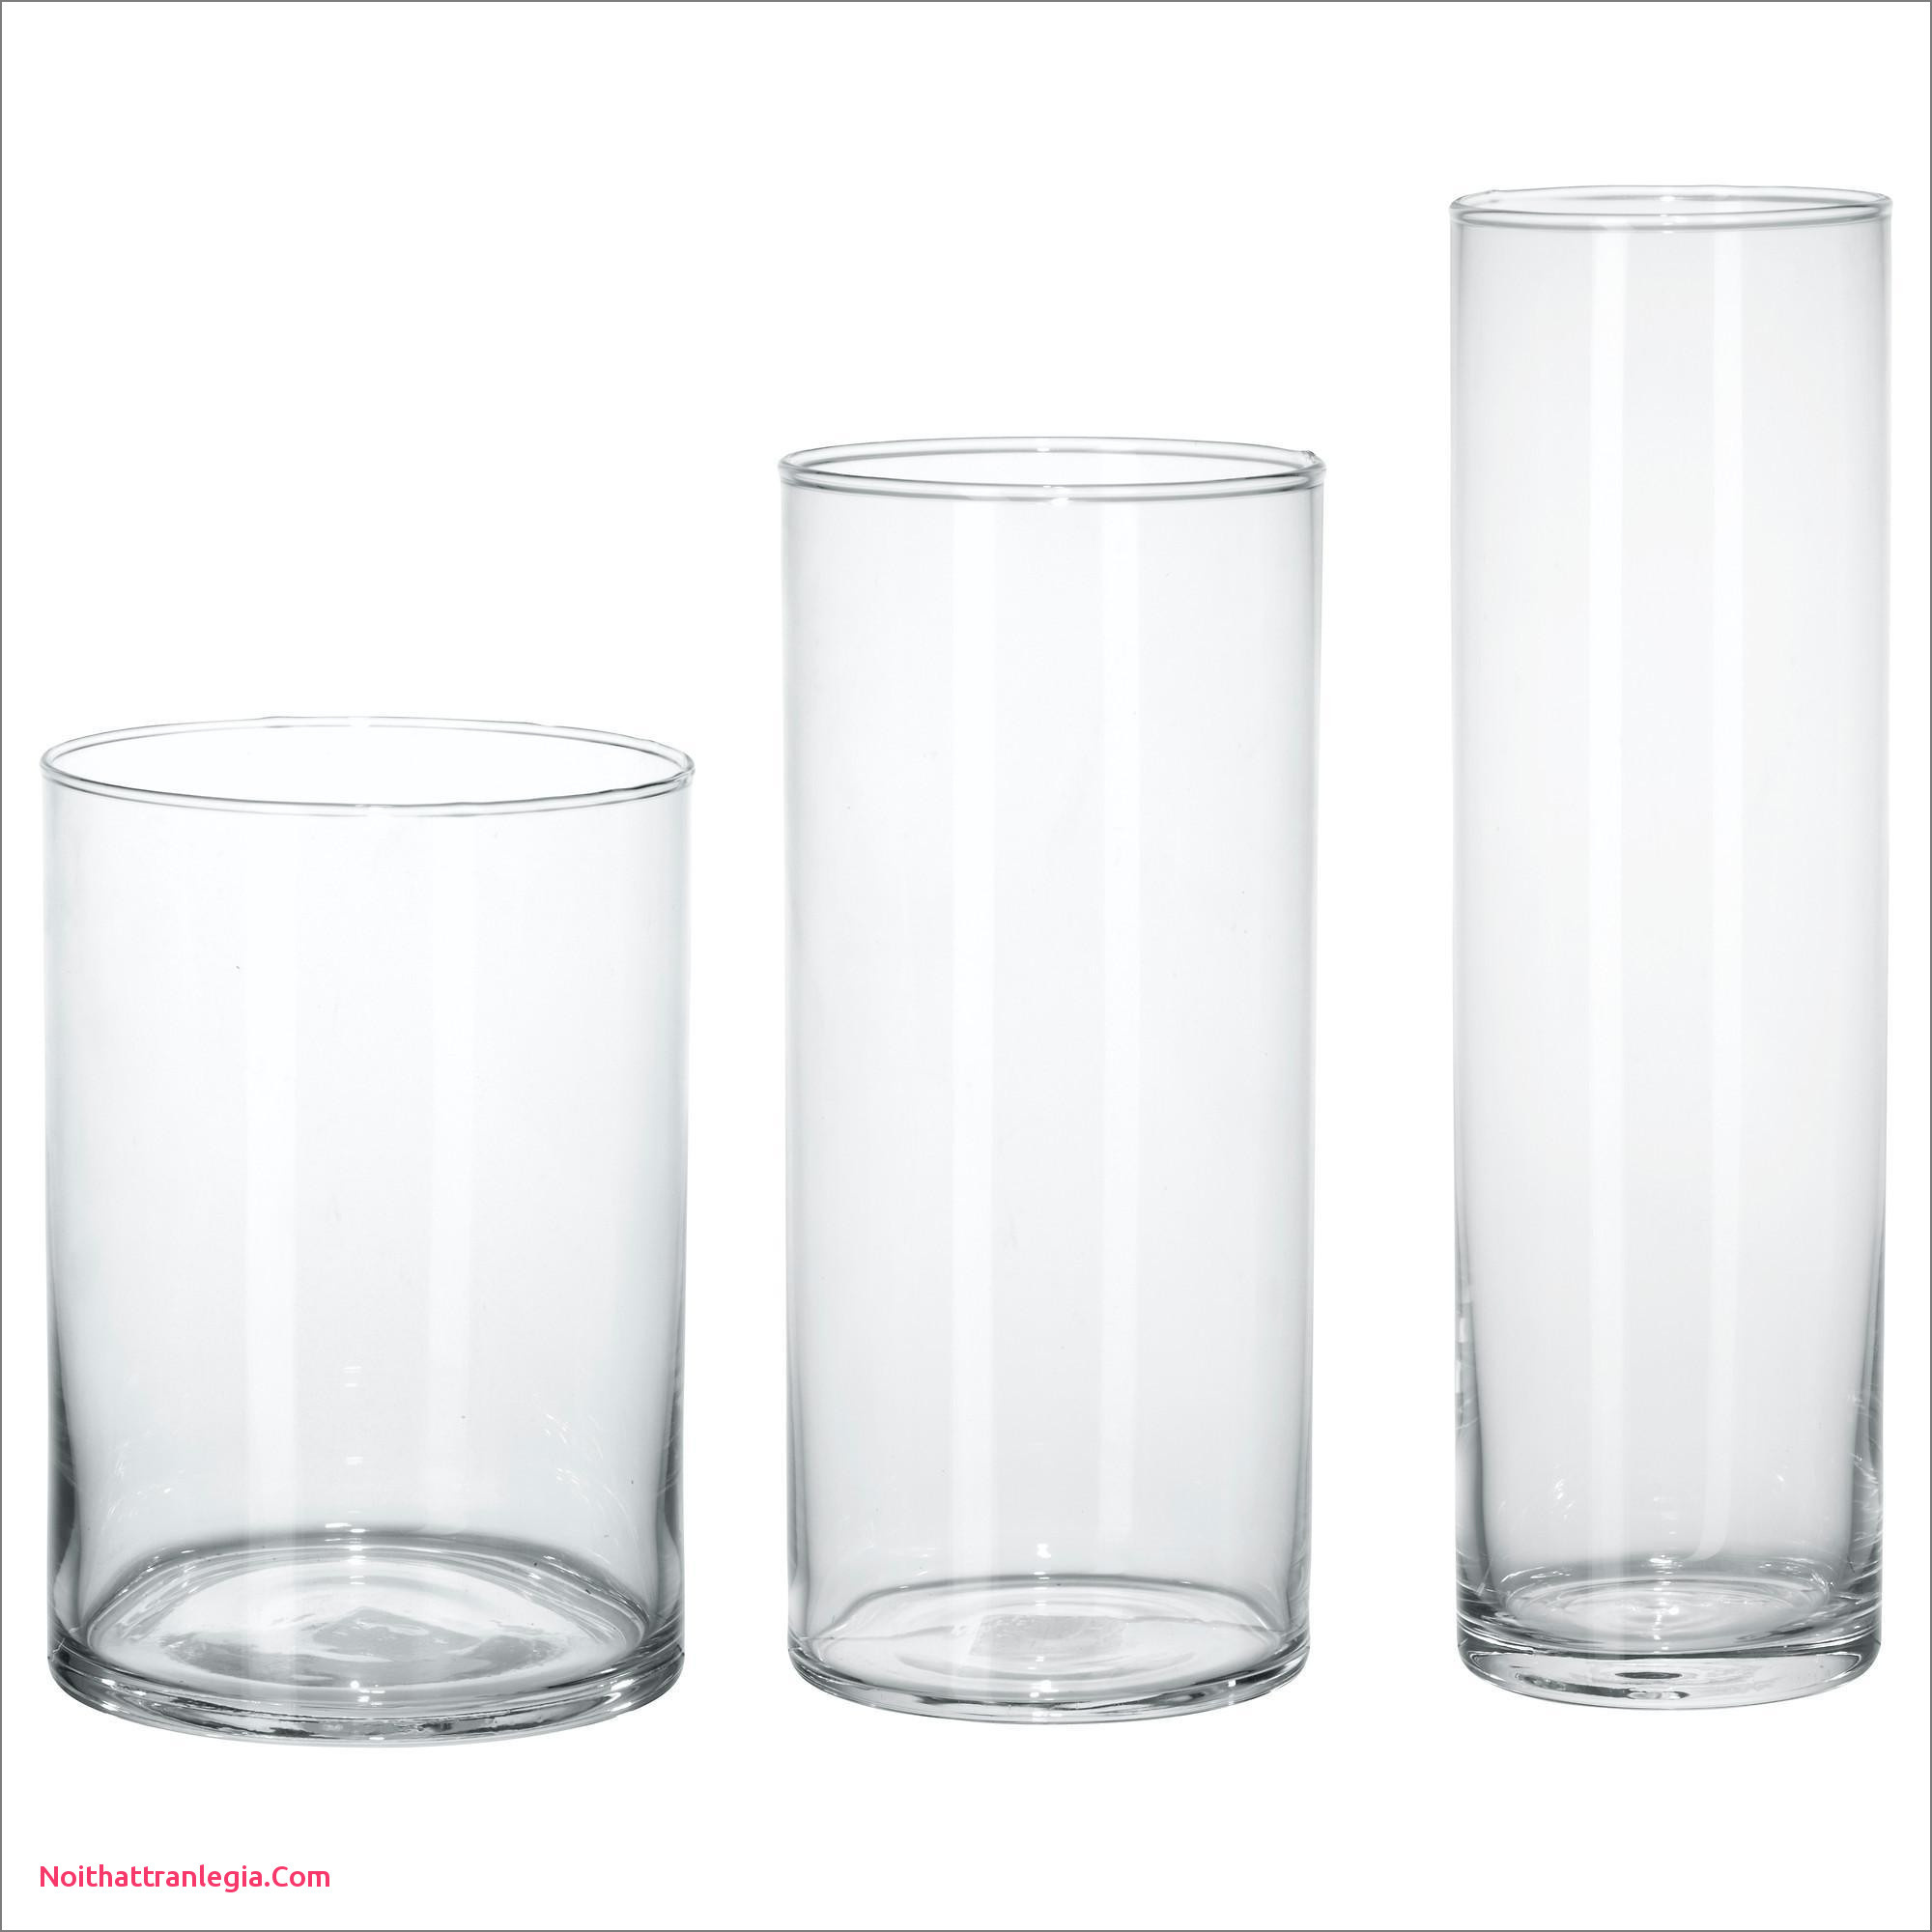 24 attractive Glass Cylinder Vases 20 2024 free download glass cylinder vases 20 of 20 large floor vase nz noithattranlegia vases design pertaining to home design elegant floor vase ikea floor vase ikea fresh badregal ikea inspirierend living room